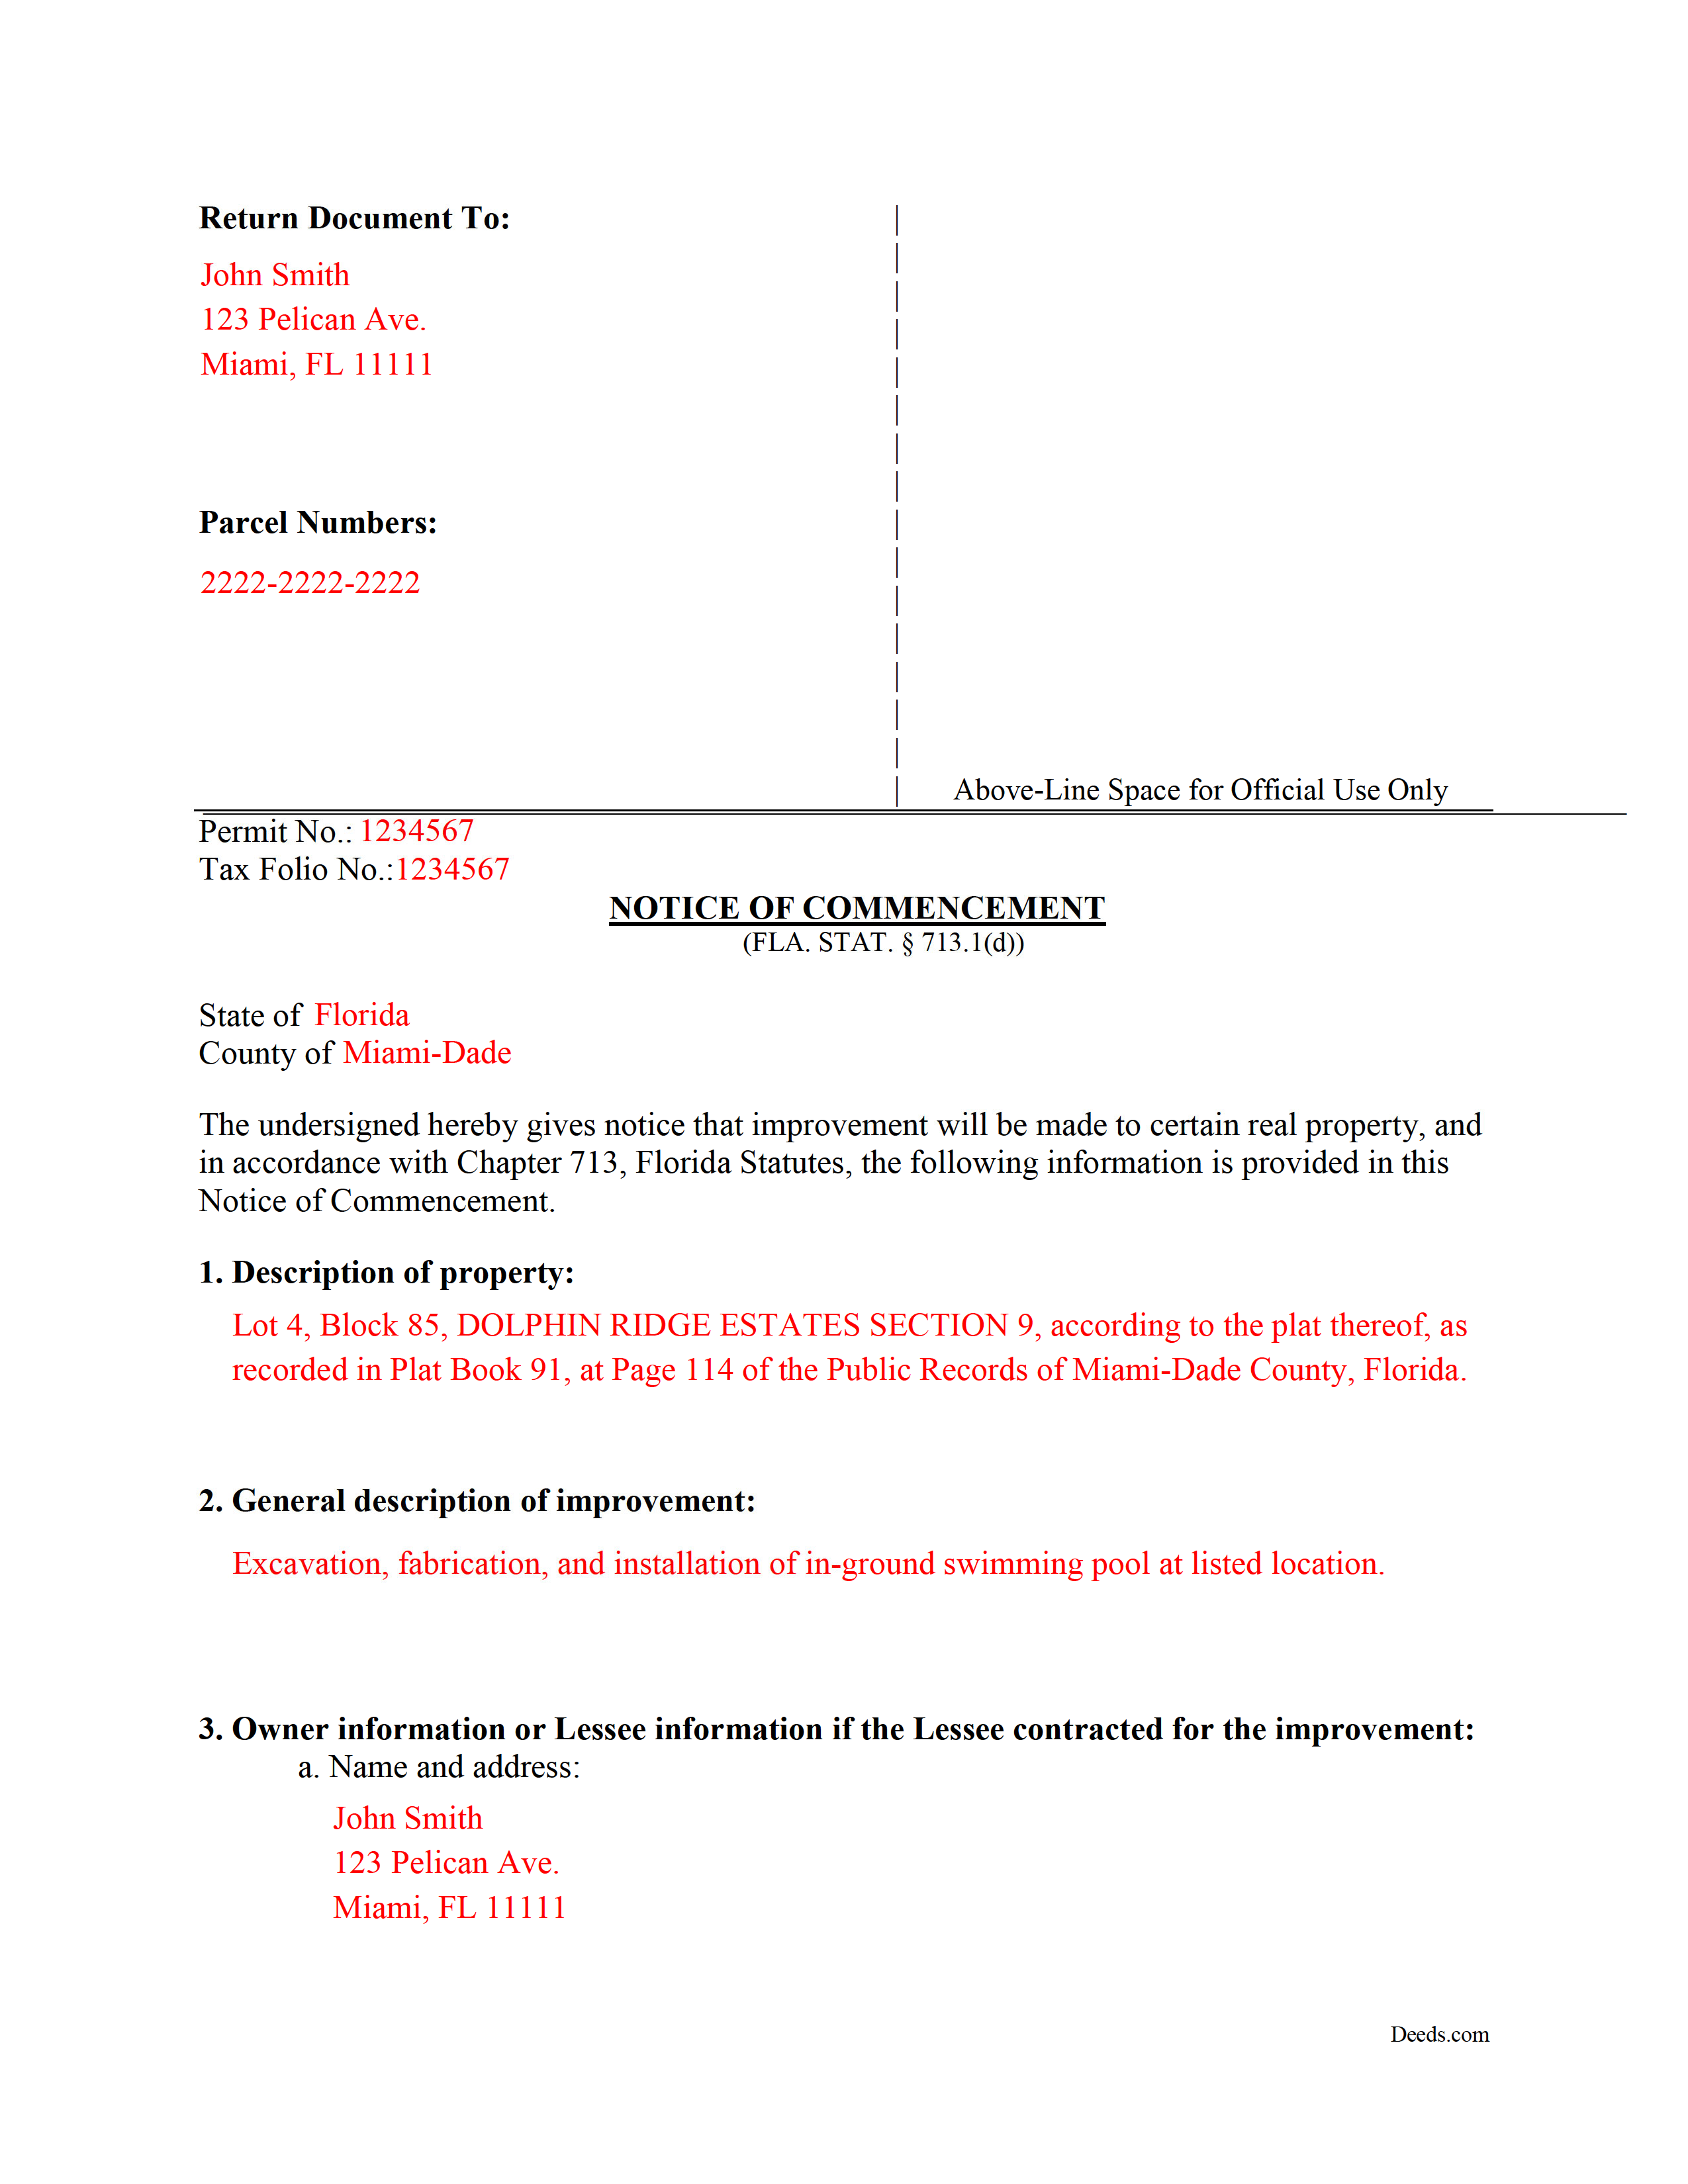 Completed Example of the Notice of Commencement Document